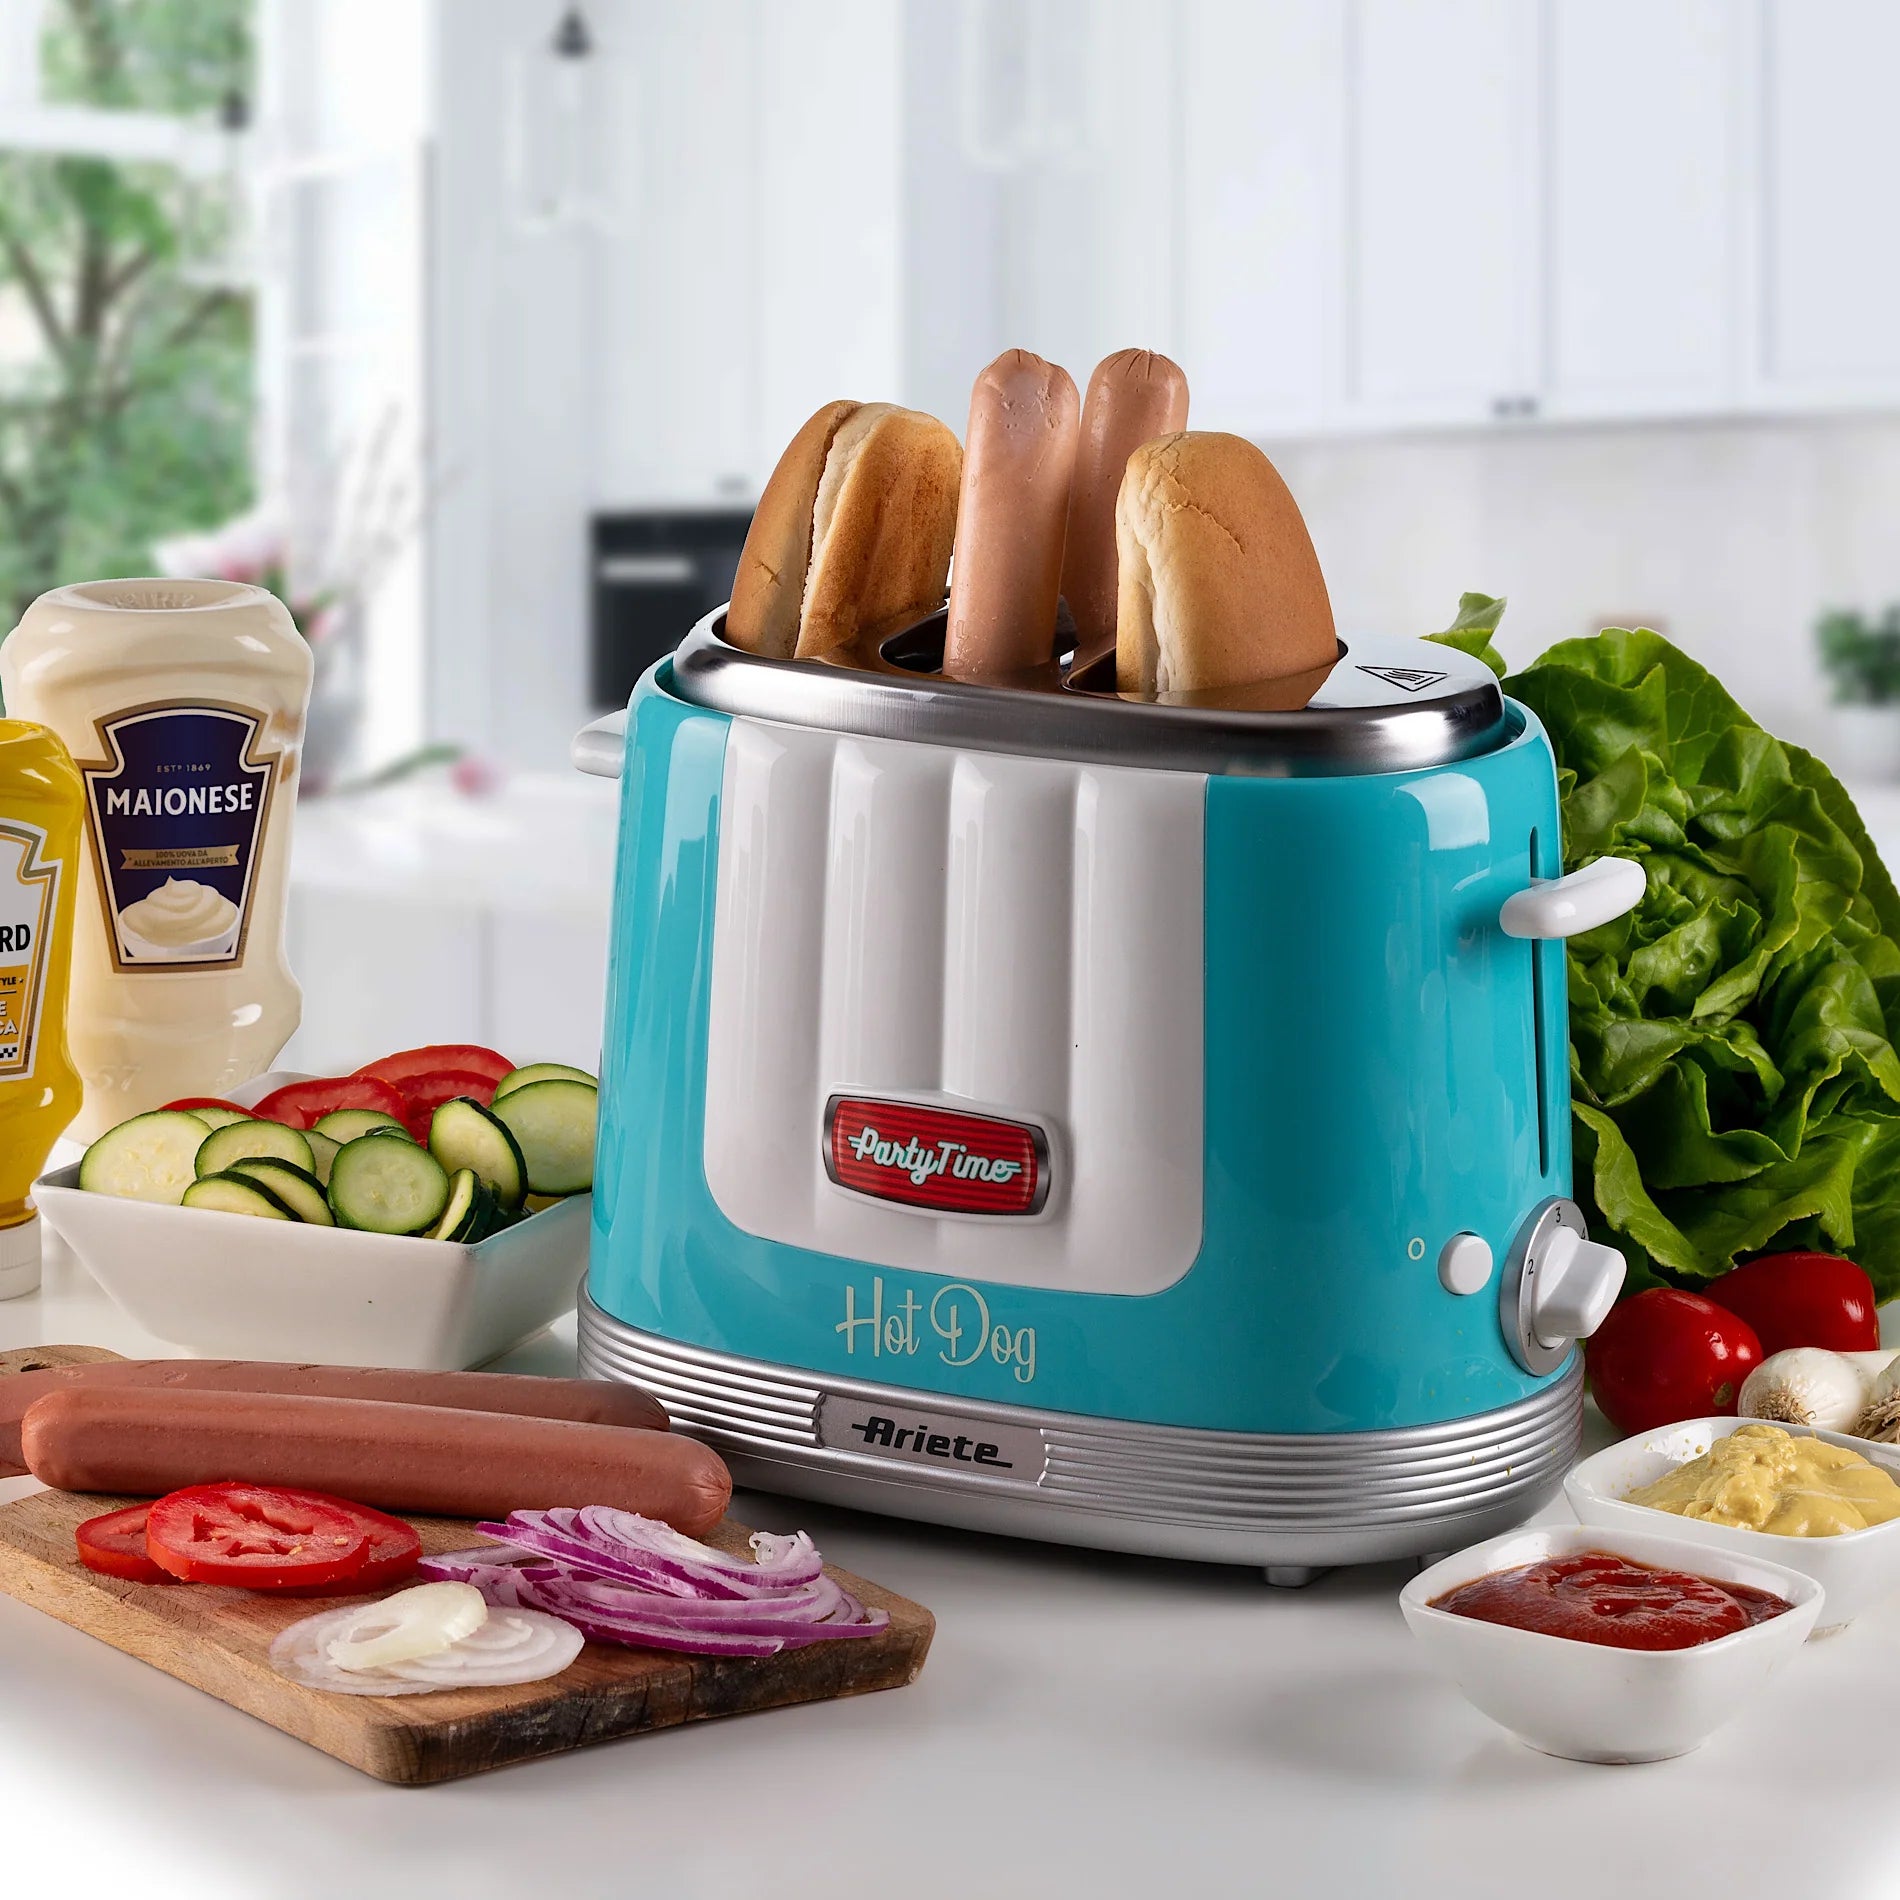 Ariete Hot dog maker party time